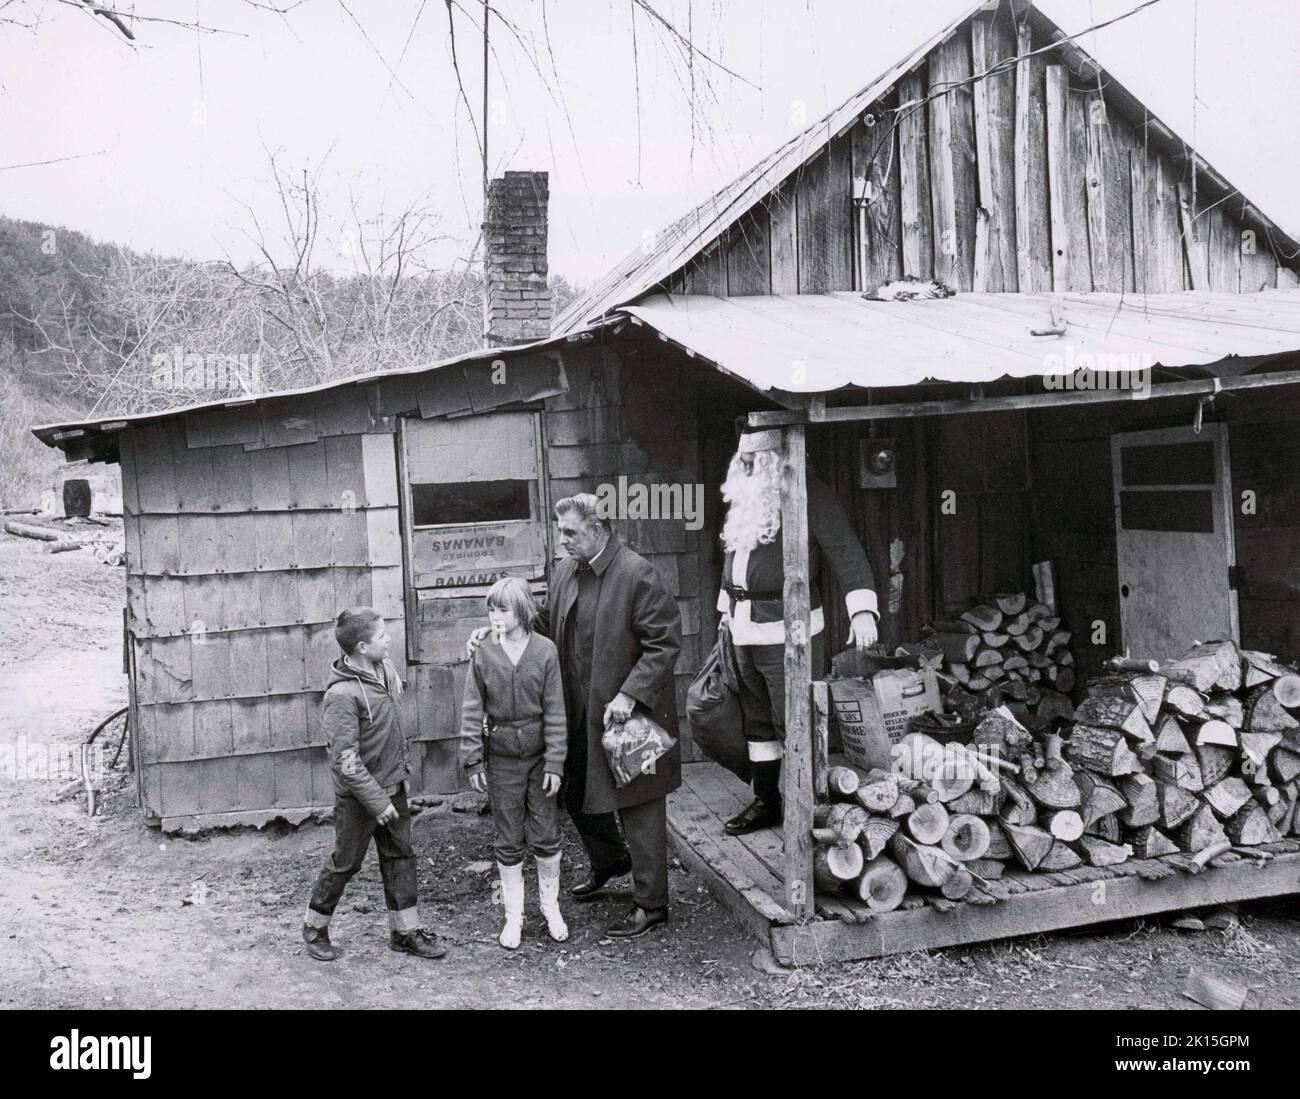 Santa Claus brings presents to children in Appalachia, thanks to the Parson of the Hills; 1965. The charity was set up to provide gifts to the children of the Appalachias. Here, the Parson and Santa give out gifts to two kids outside their home. Stock Photo